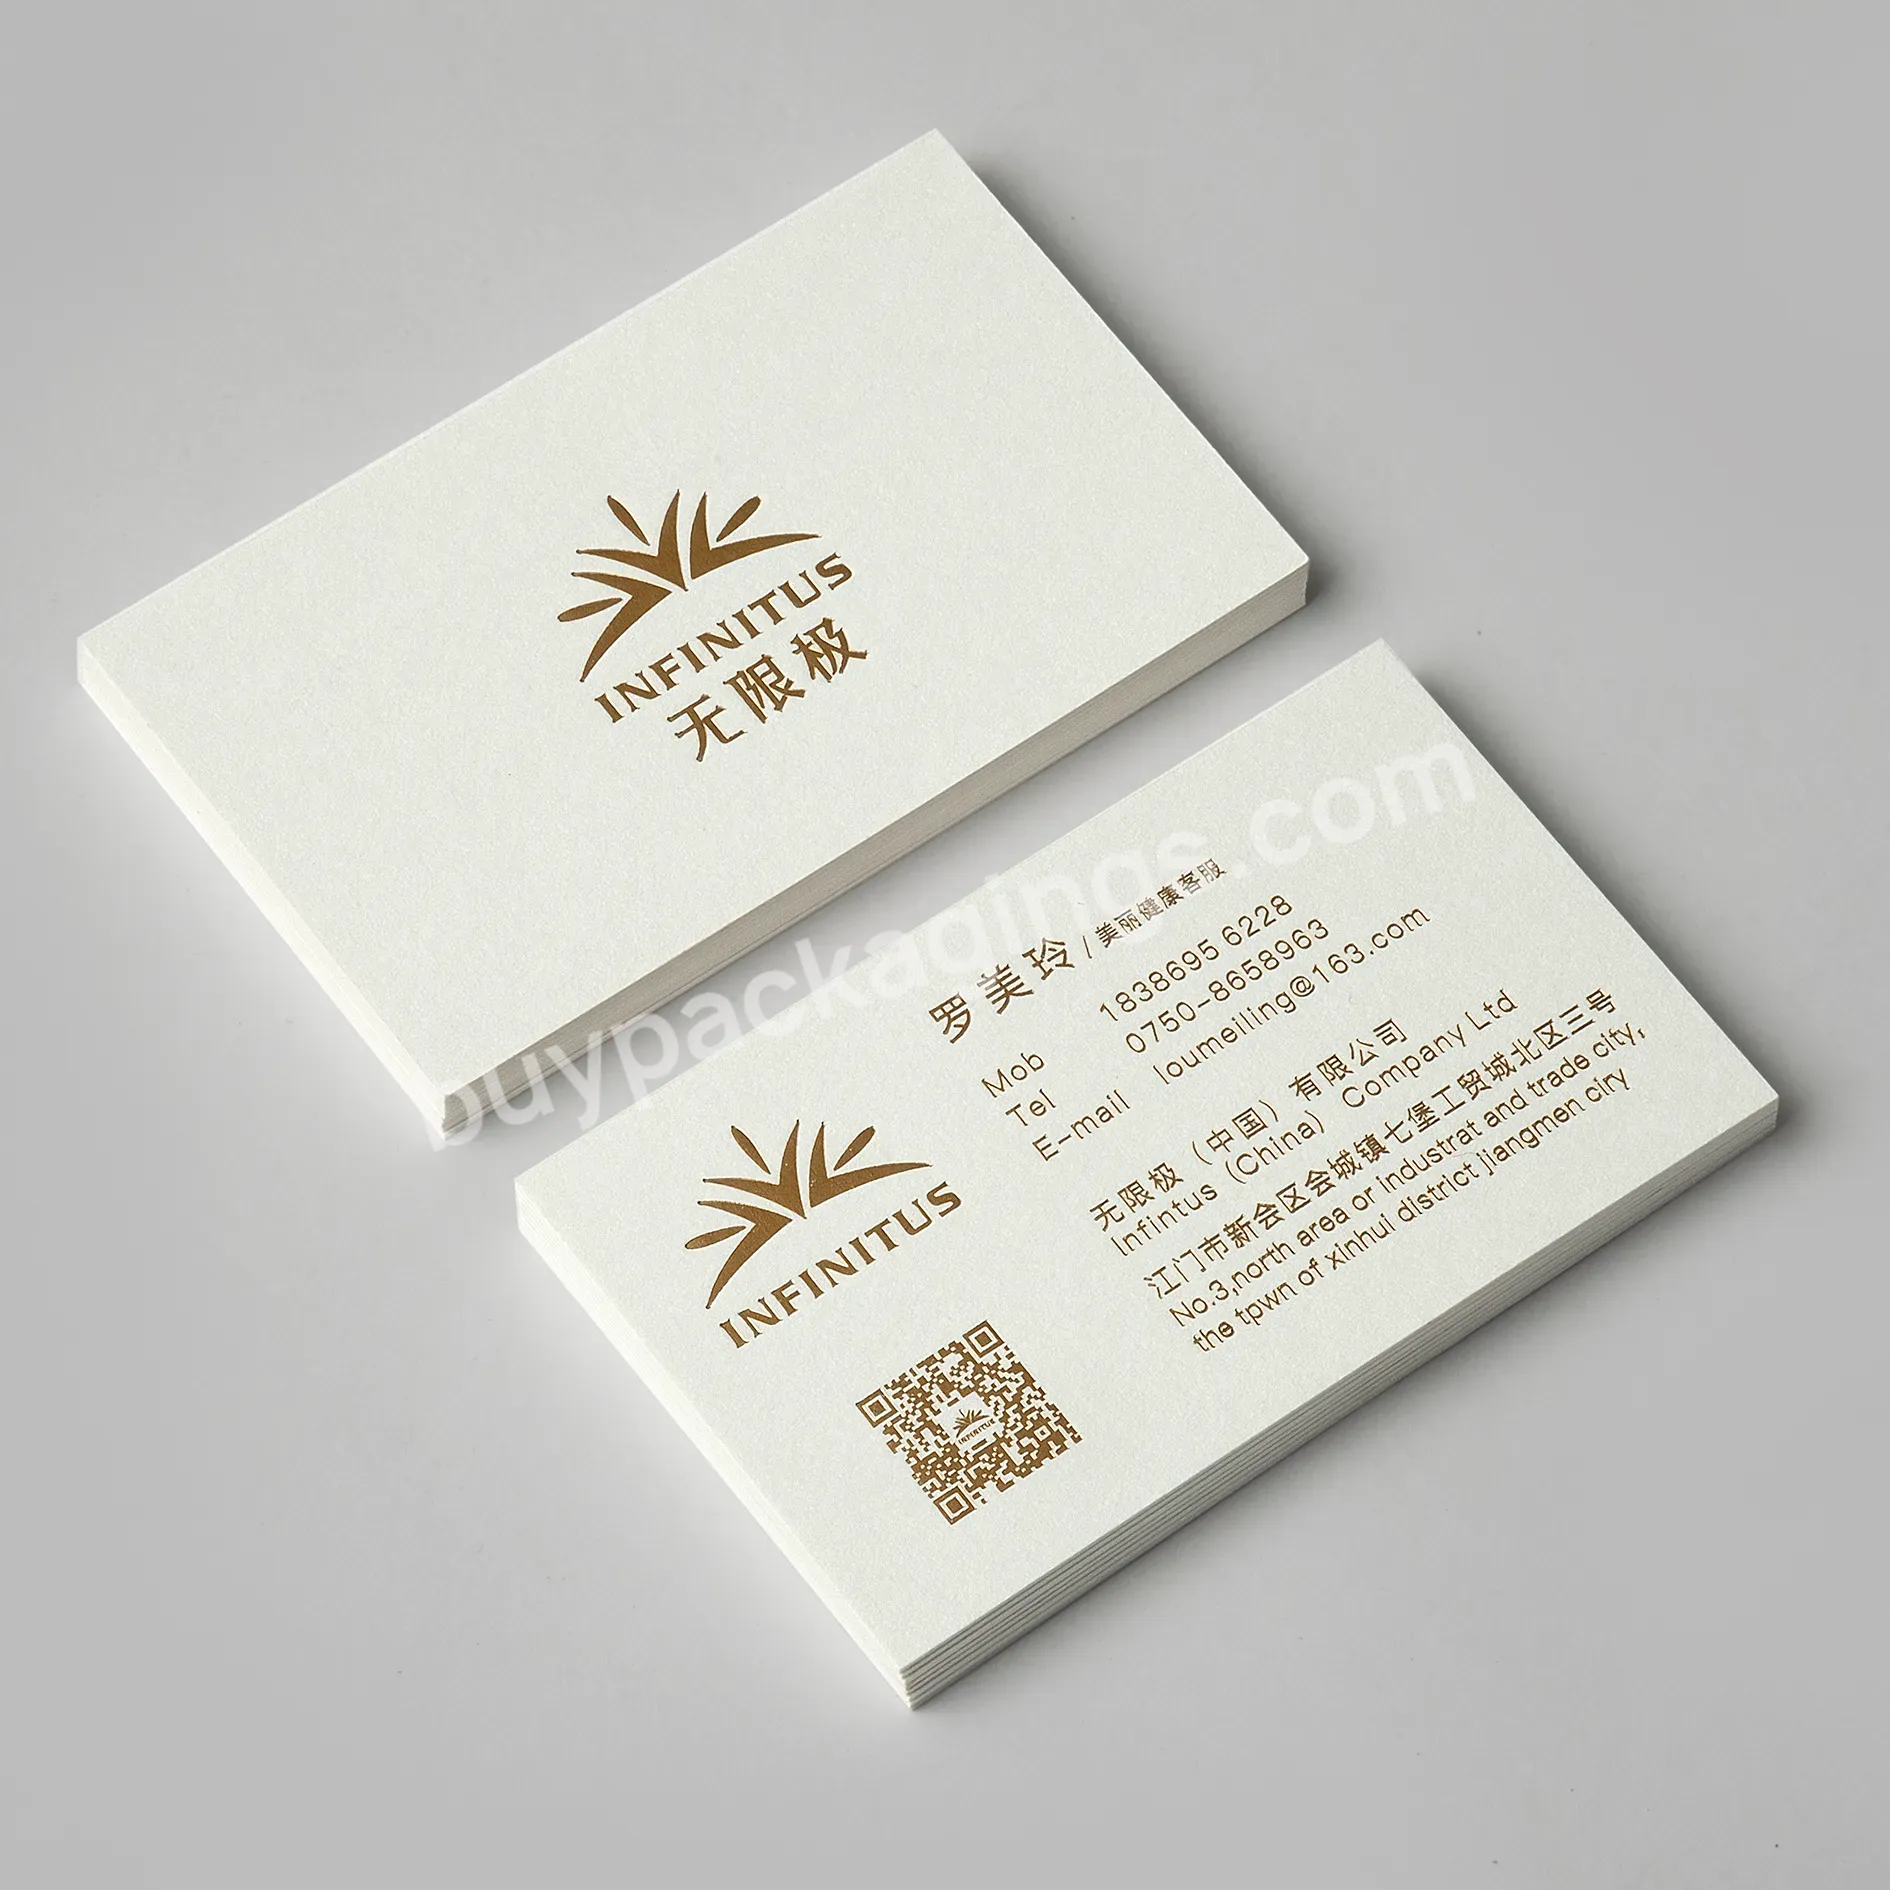 Custom Logo Printing Your Own Text Business Cards Paper Matte Glossy Finishing Luxury Exhibition Name Card. - Buy Custom Logo Printing Your Own Text Business Cards,Paper Matte Glossy Finishing Luxury Exhibition Name Card,Business Name Card.